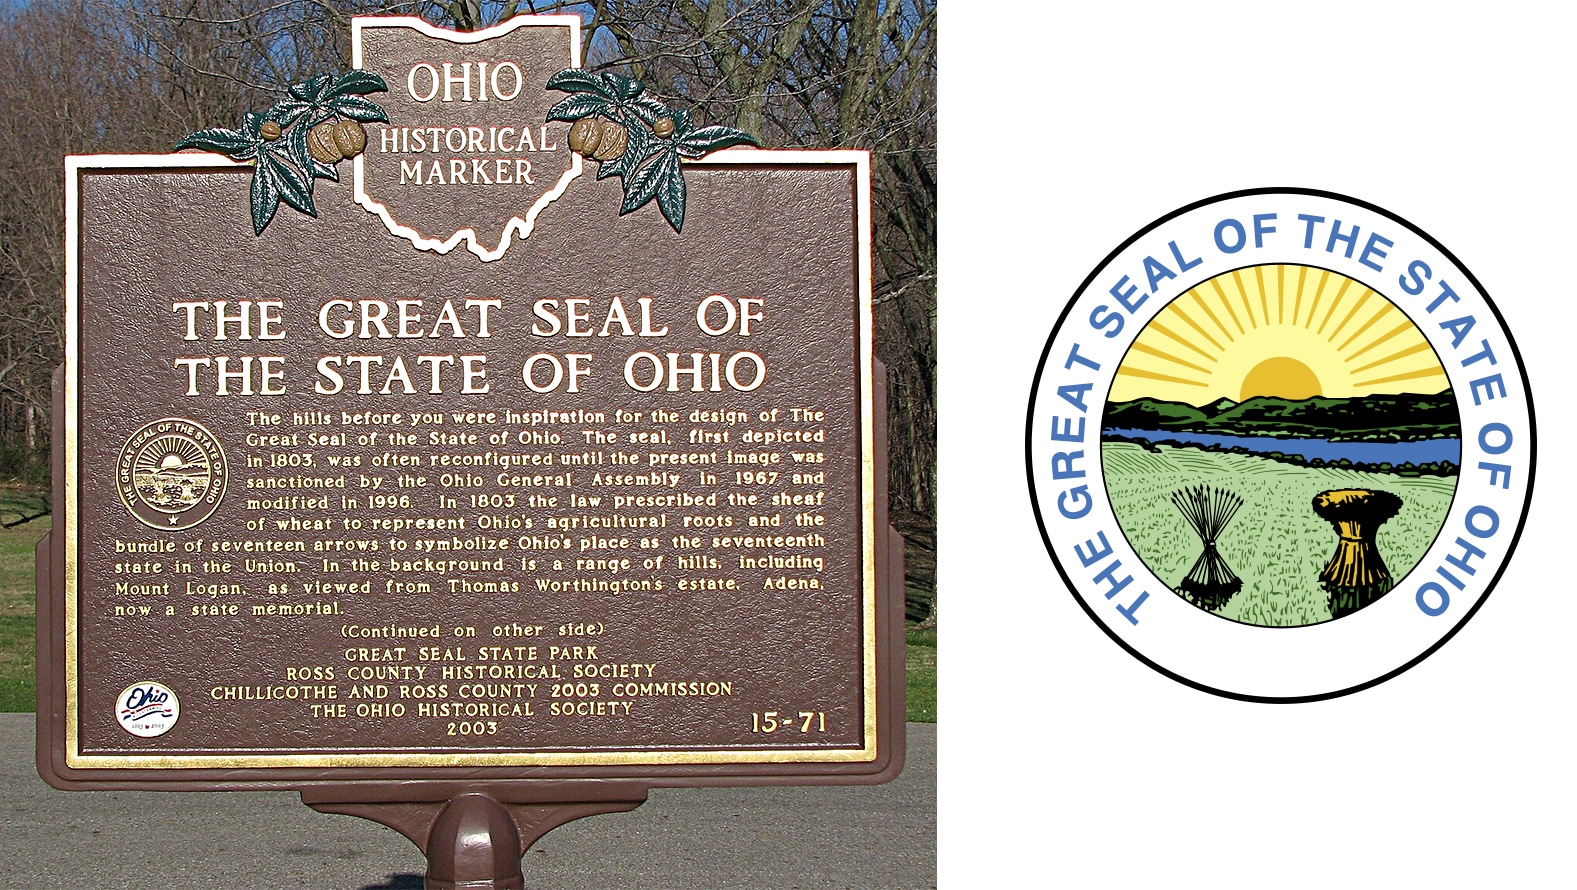 horizontal image showing the historical marker for the Great Seal of the State of Ohio on the left, and the great seal of the state of ohio on the right.